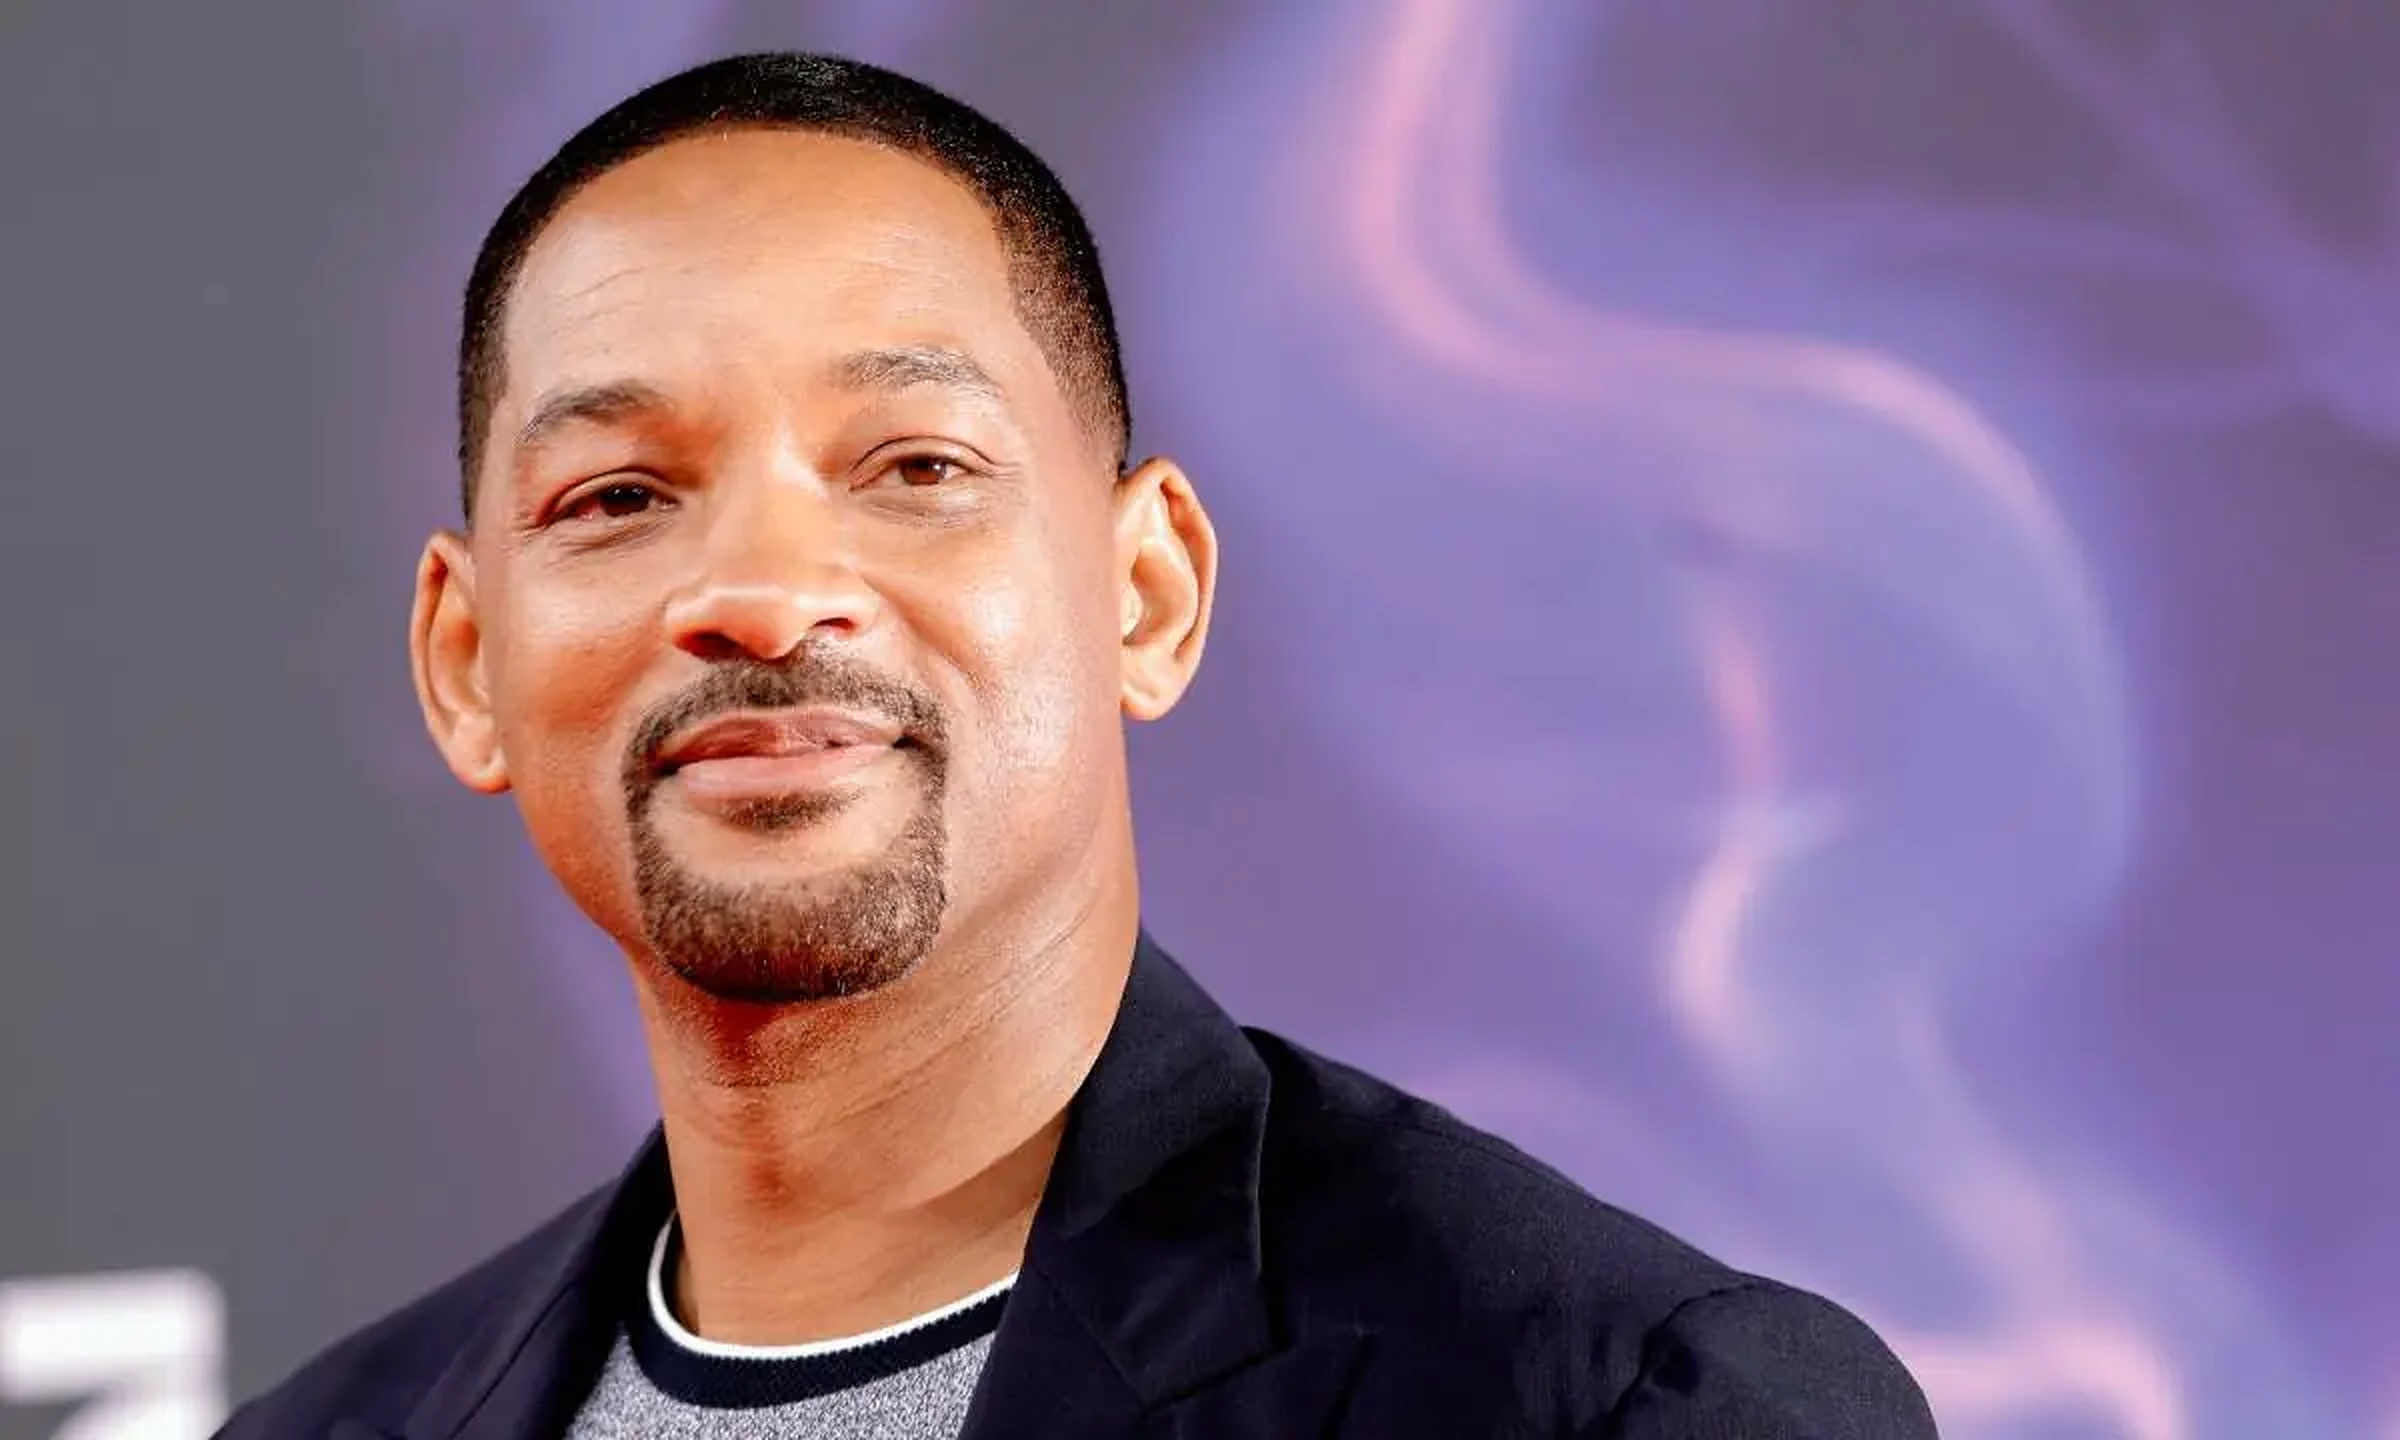 Will Smith breaks silence on ‘ridiculous’ rumors about his sexuality